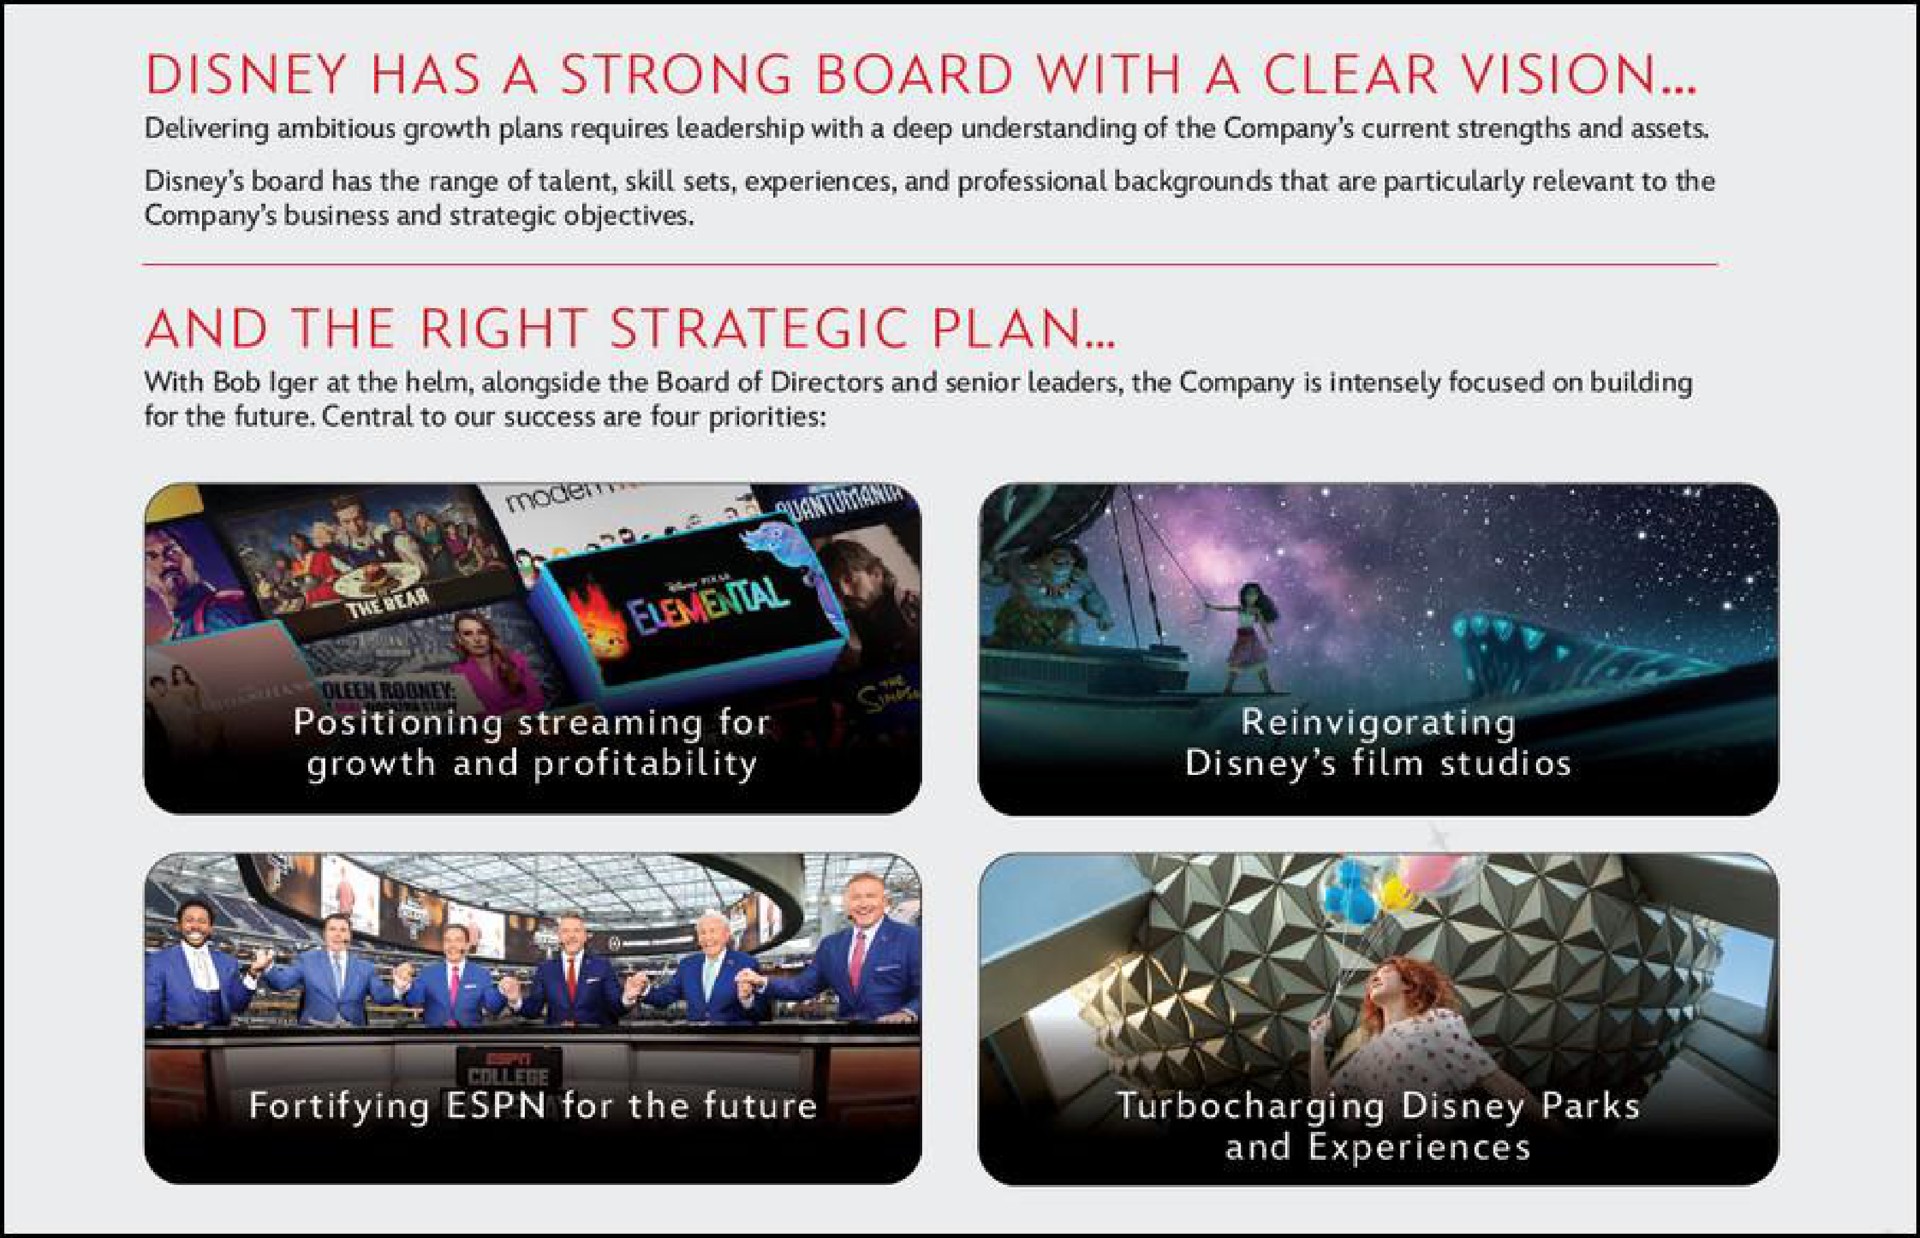 has a strong board with a clear vision and the right strategic plan | Disney